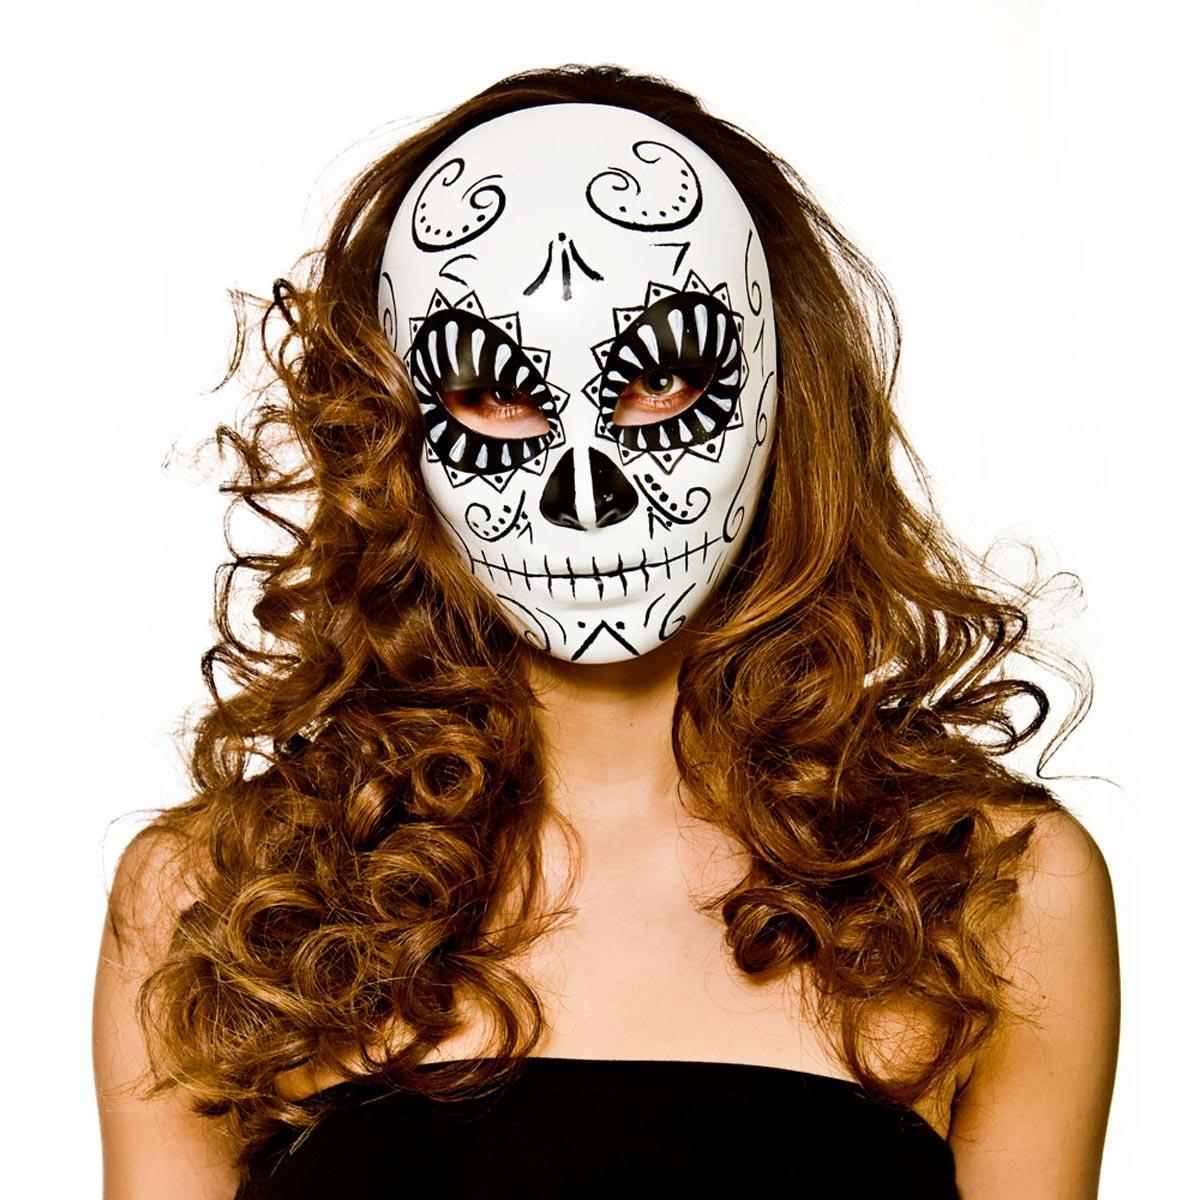 Day of the Dead Senorita Mask with ribbon ties by Wicvked MK9966 available from a collection here at Karnival Costumes online party shop